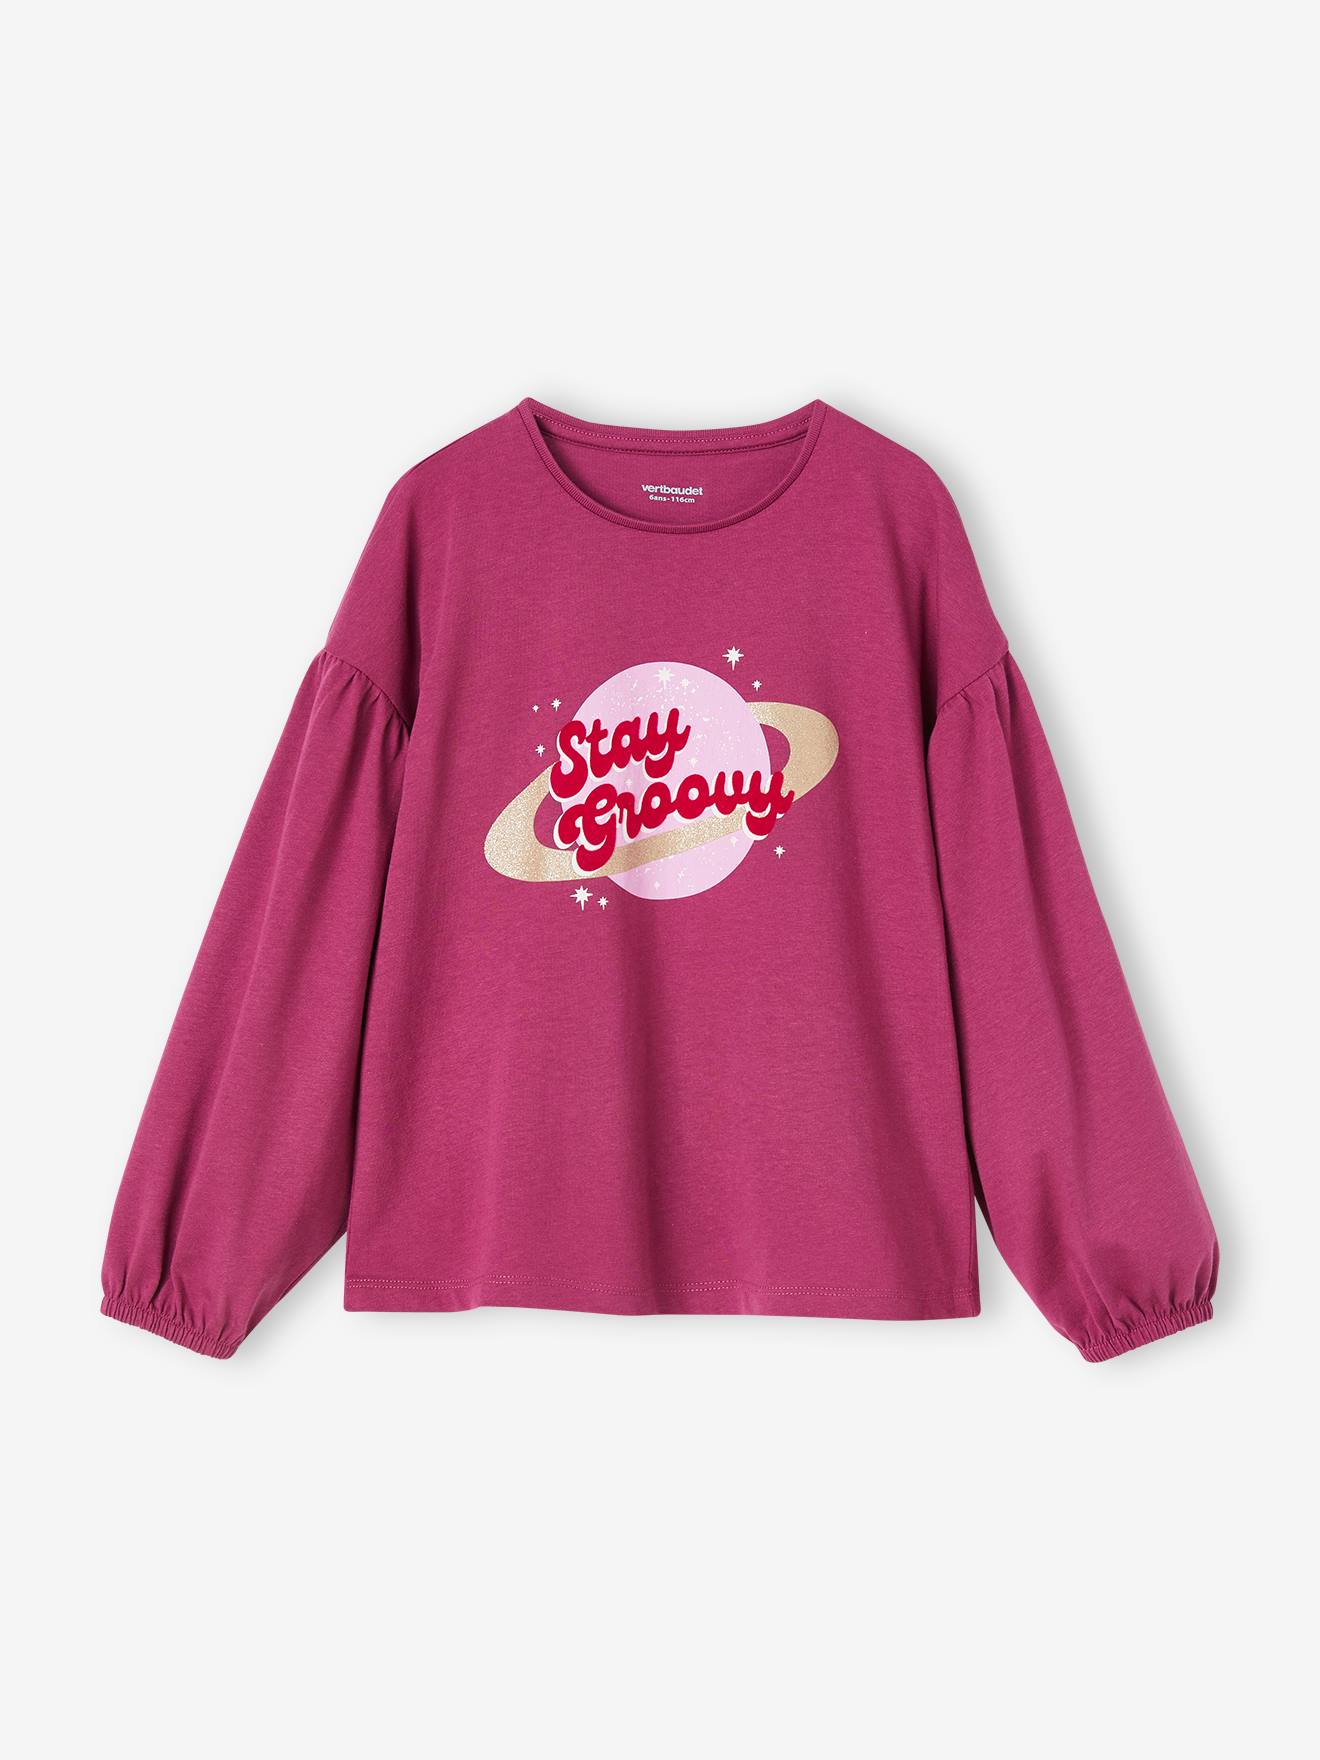 Top with Glittery Details & Message in Velour, for Girls purple clover